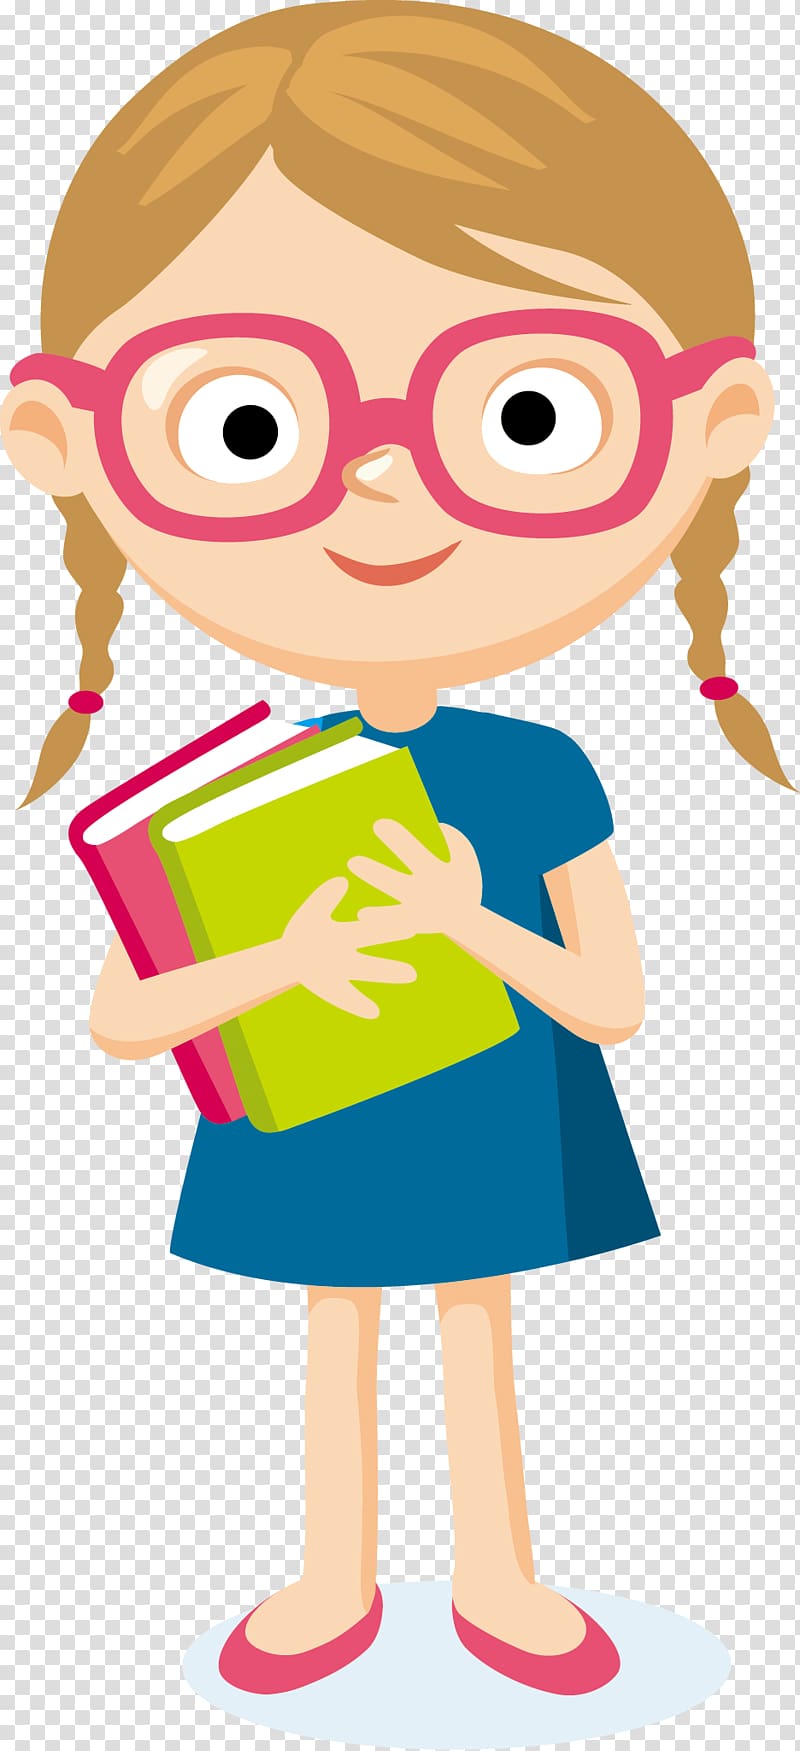 Student clipart cartoon. Girl carrying two books